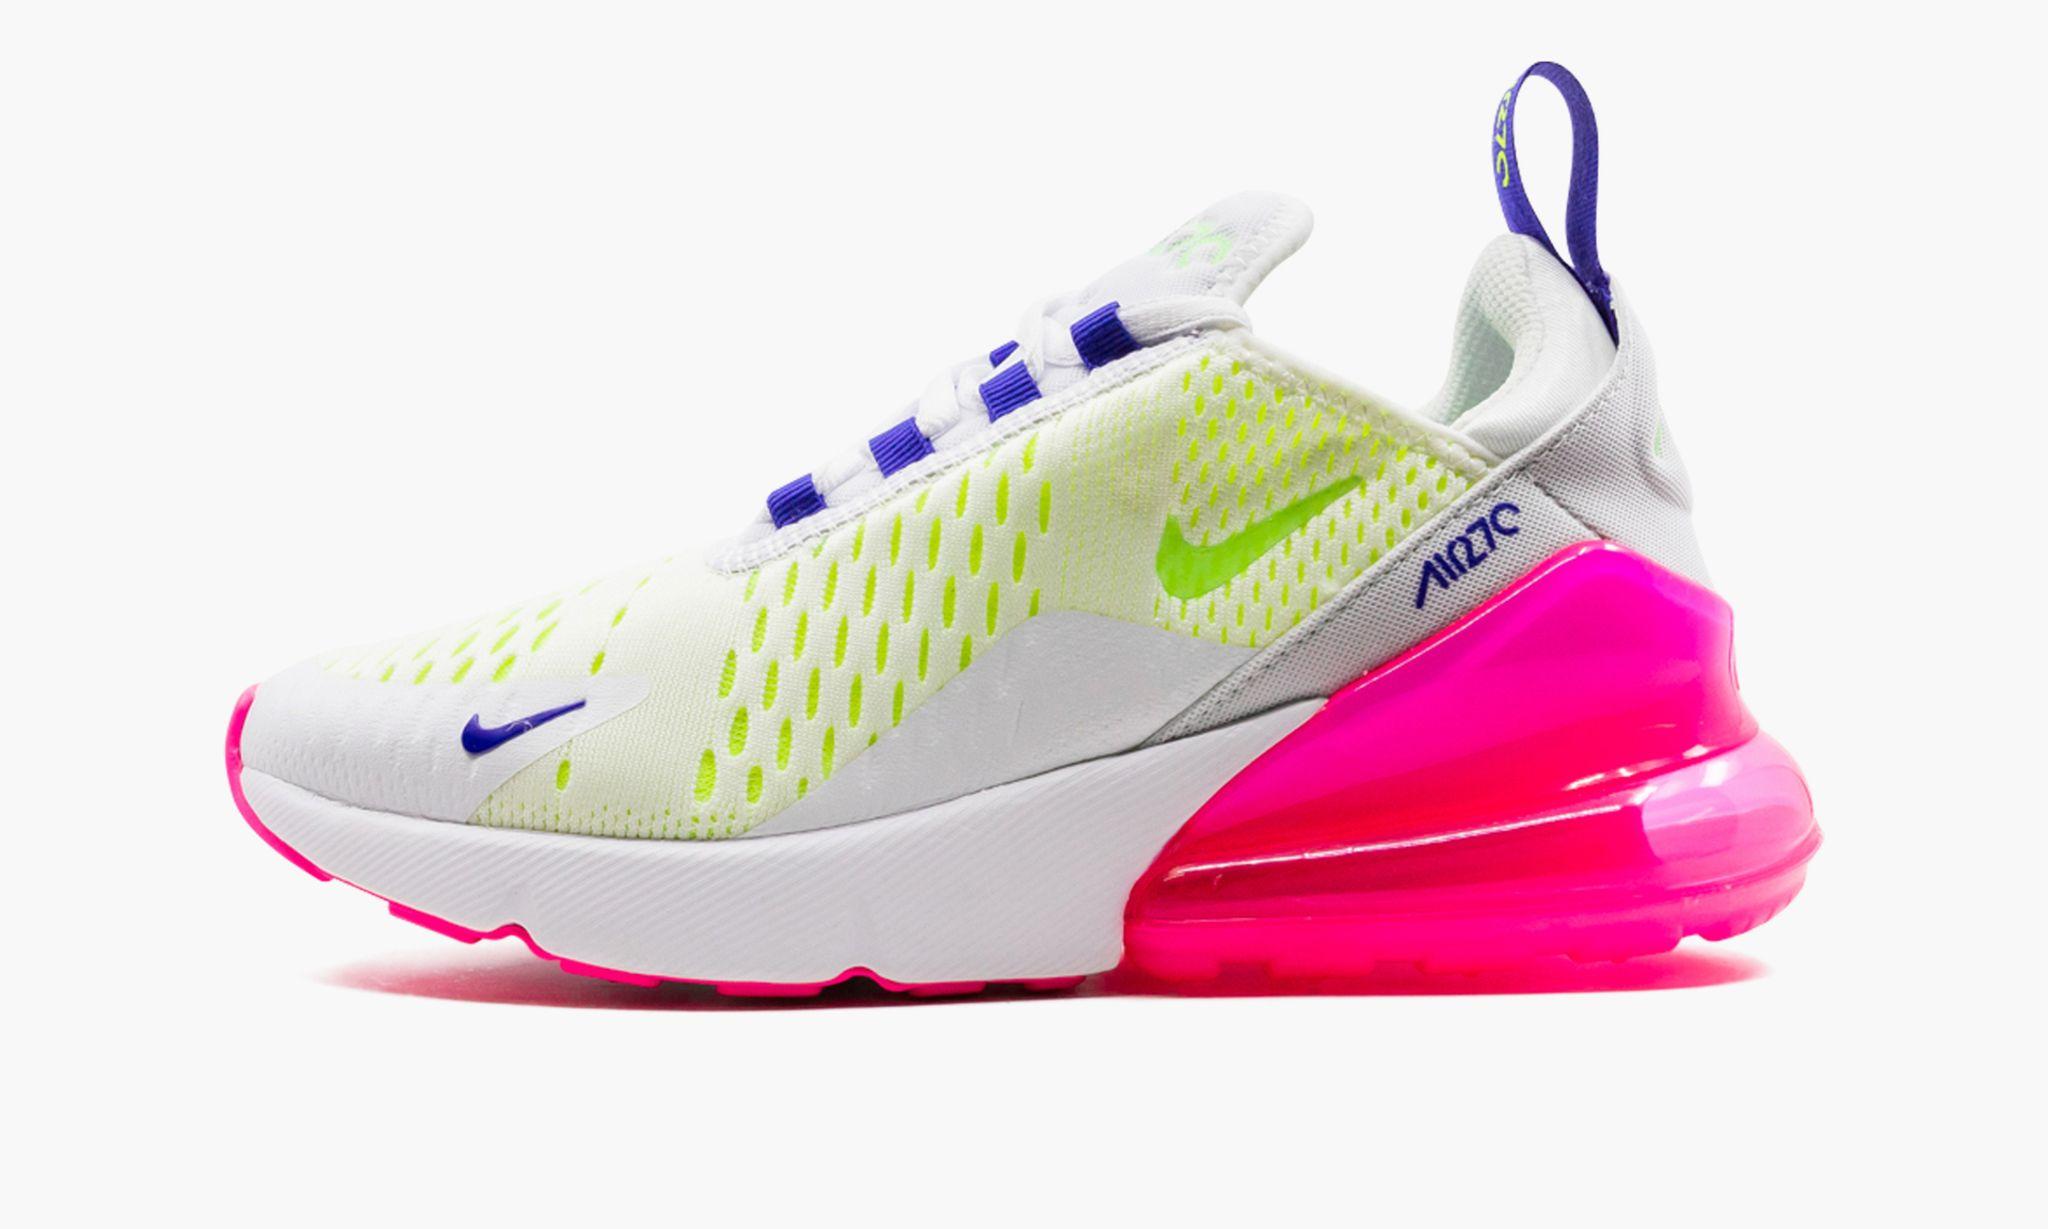 Nike 270 / Pink Blast / Volt" Shoes in | Lyst